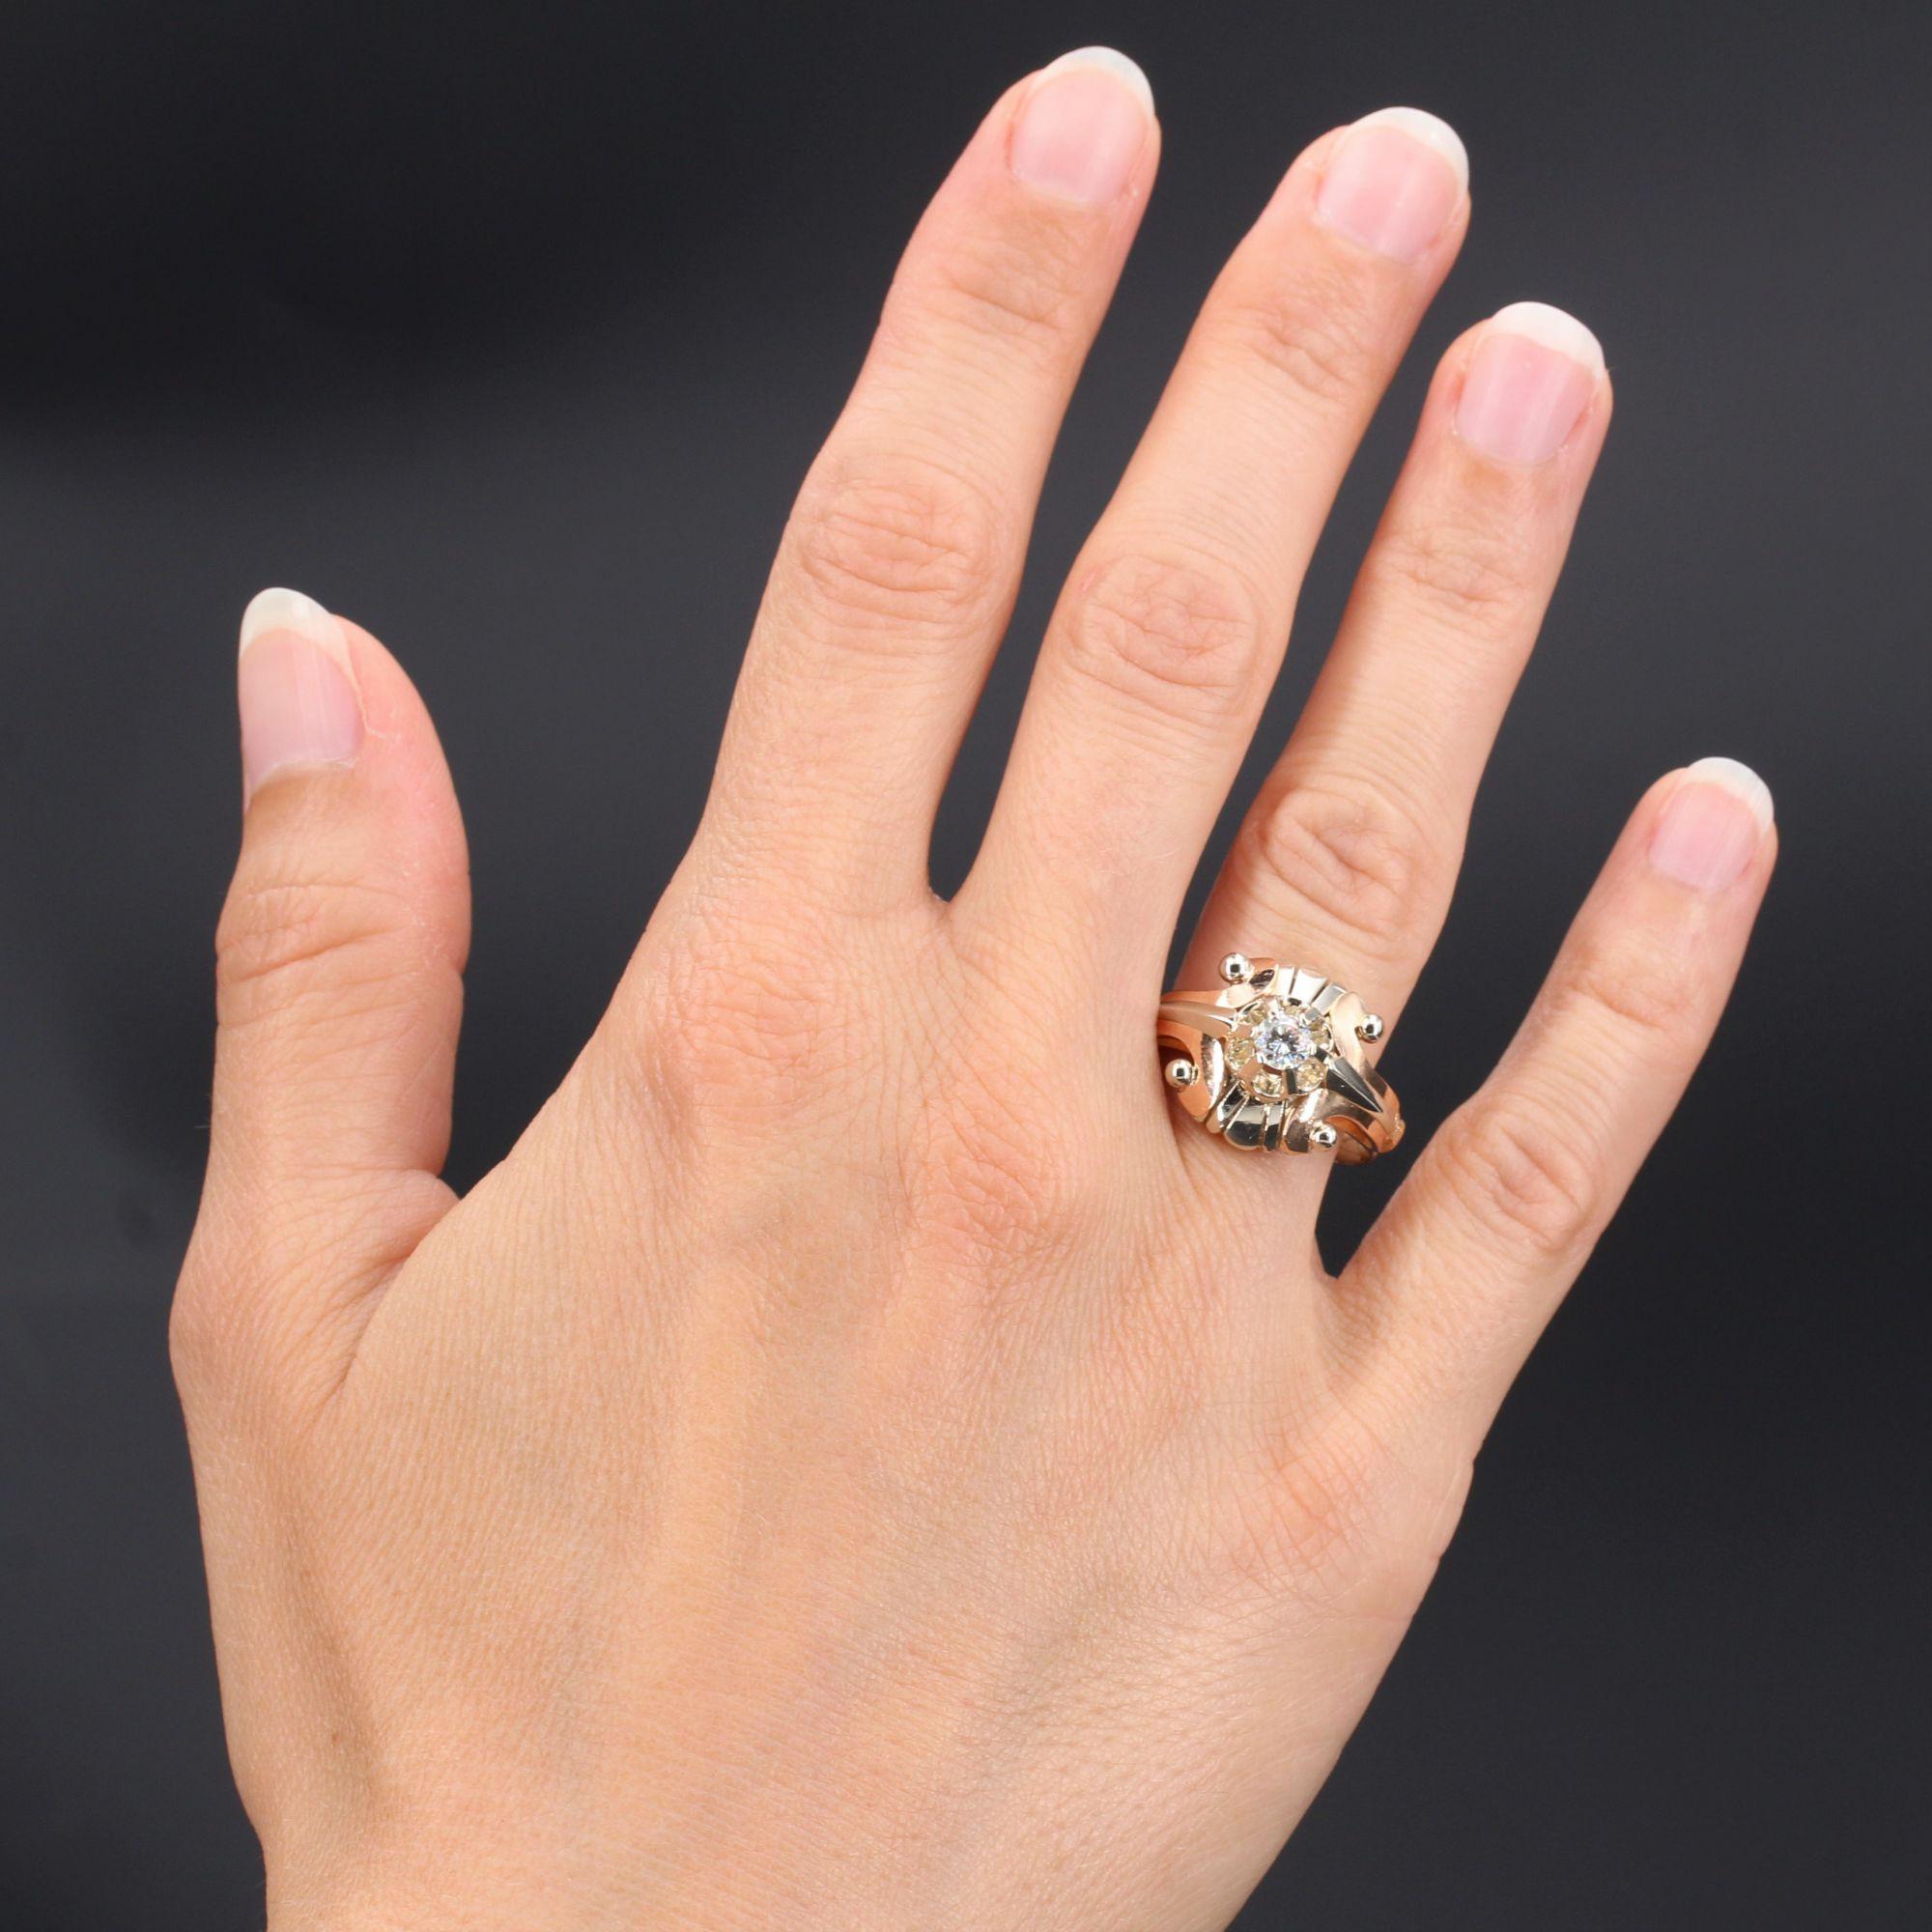 Ring in 18 karat rose and white gold.
This antique ring is set with a brilliant-cut diamond. On both sides, on the edge and on the start of the ring, an arrow pattern separating two volutes is finished with white gold pearls giving the impression of